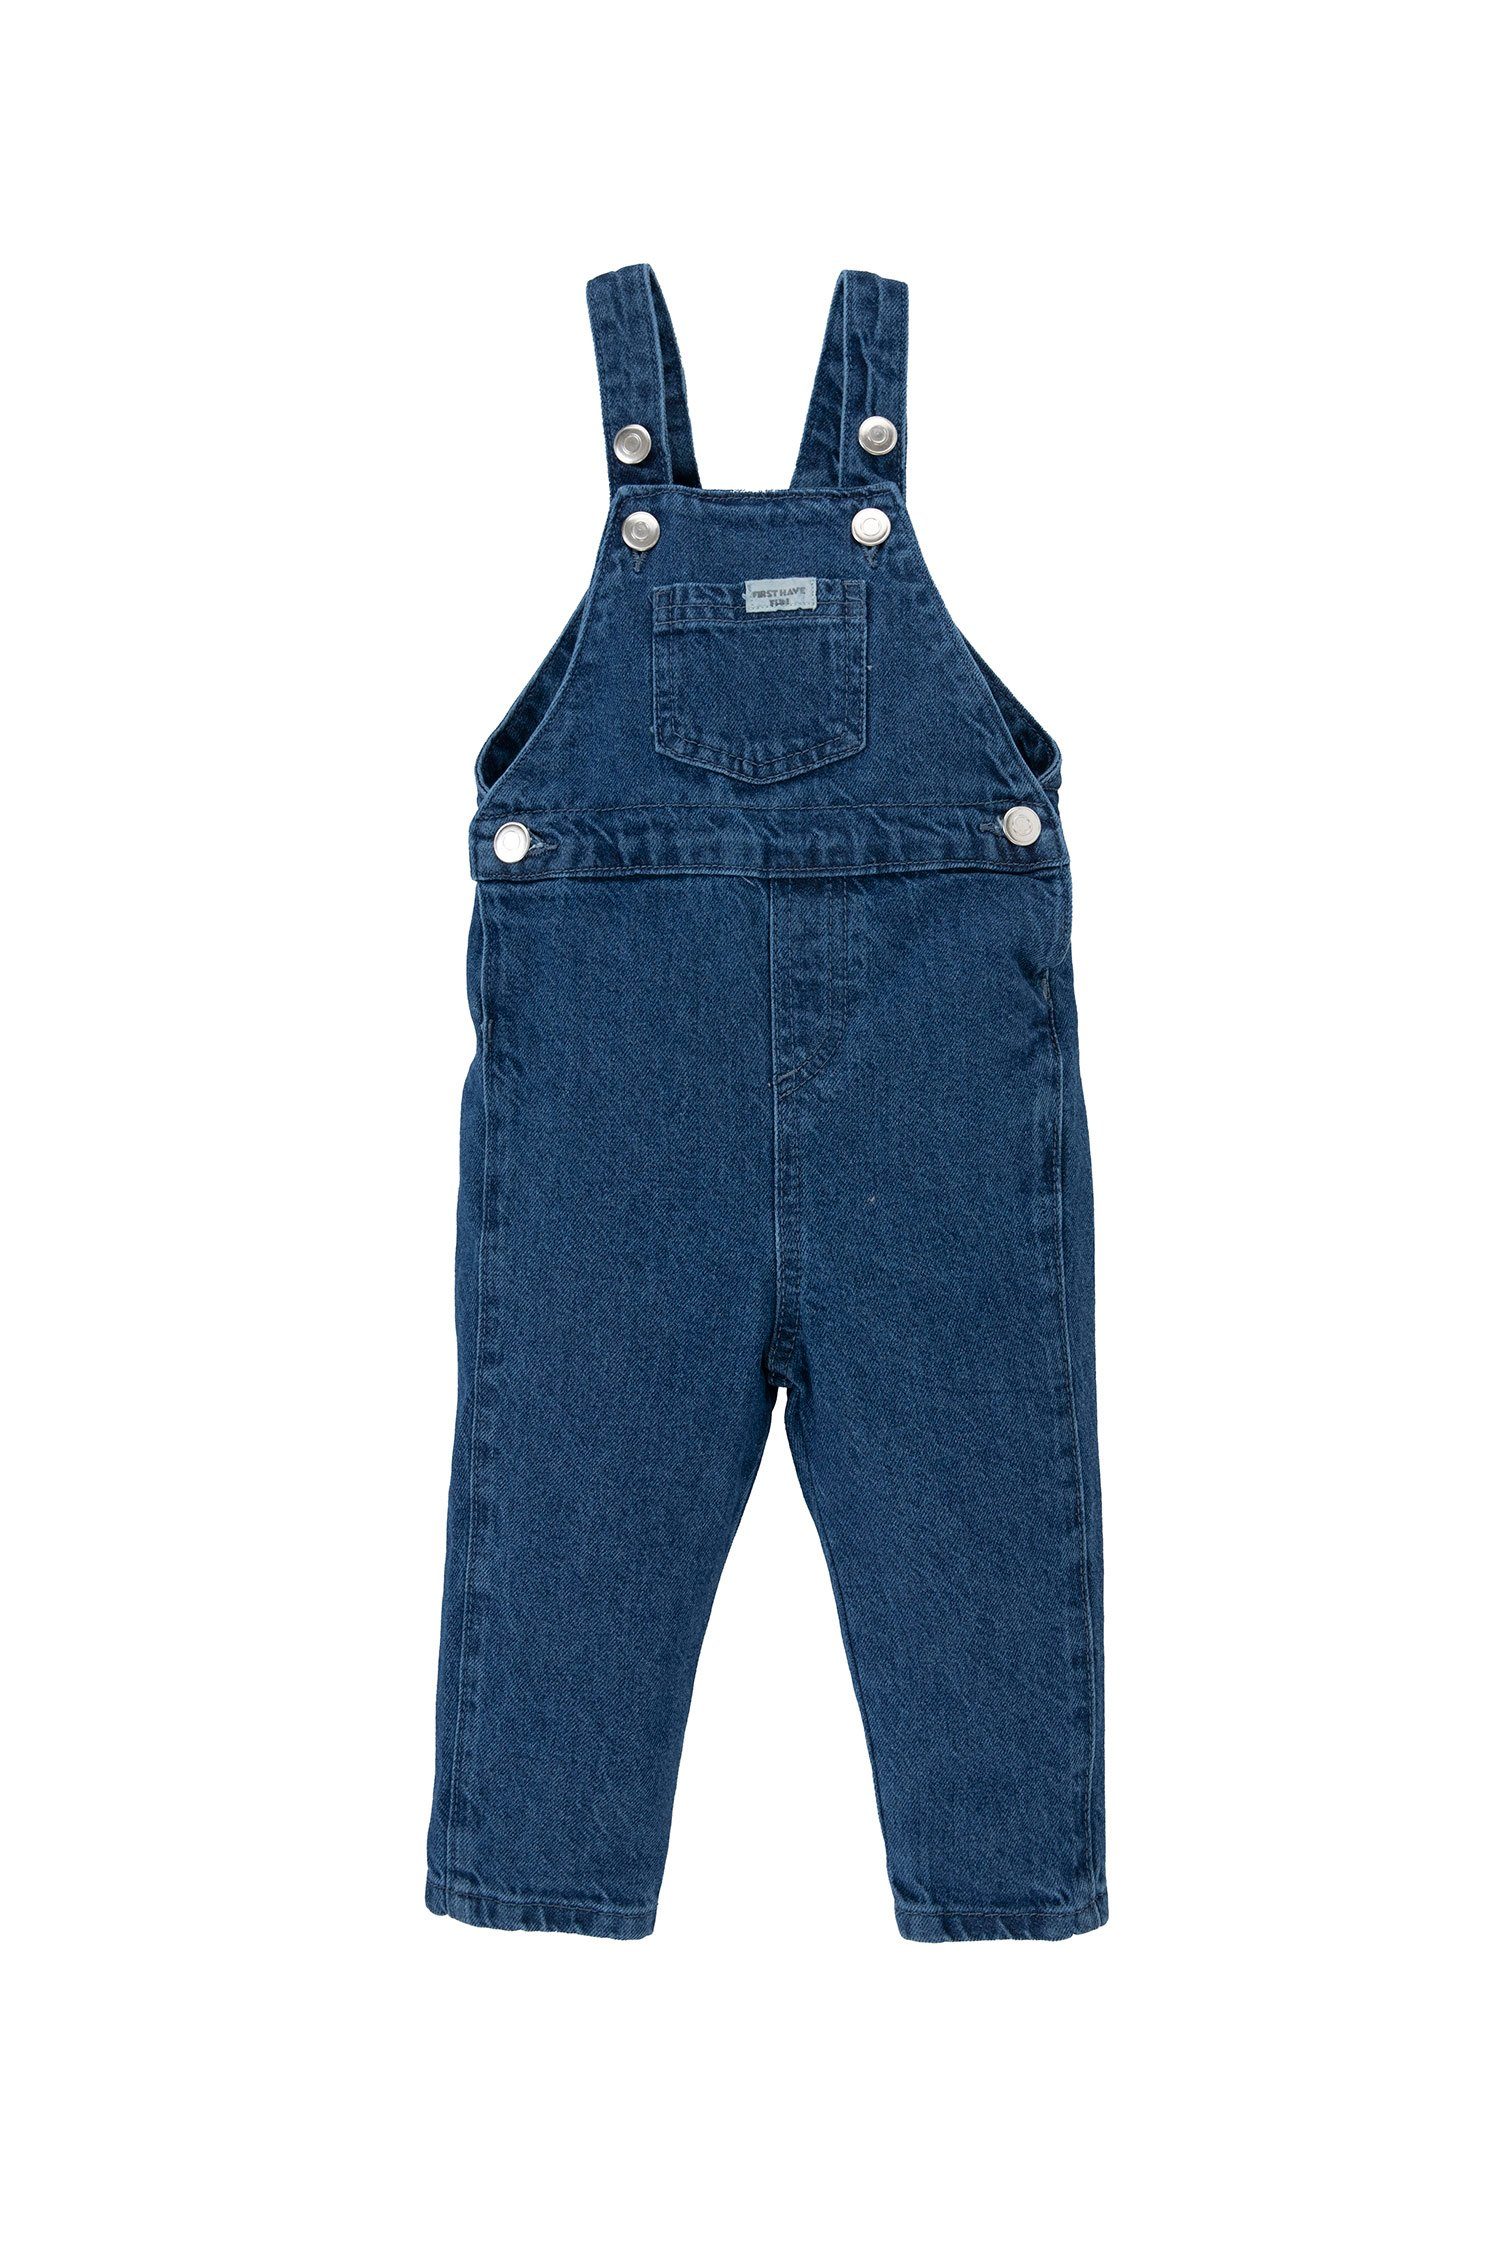 Overall DeFacto FIT REGULAR Overall BabyBoy